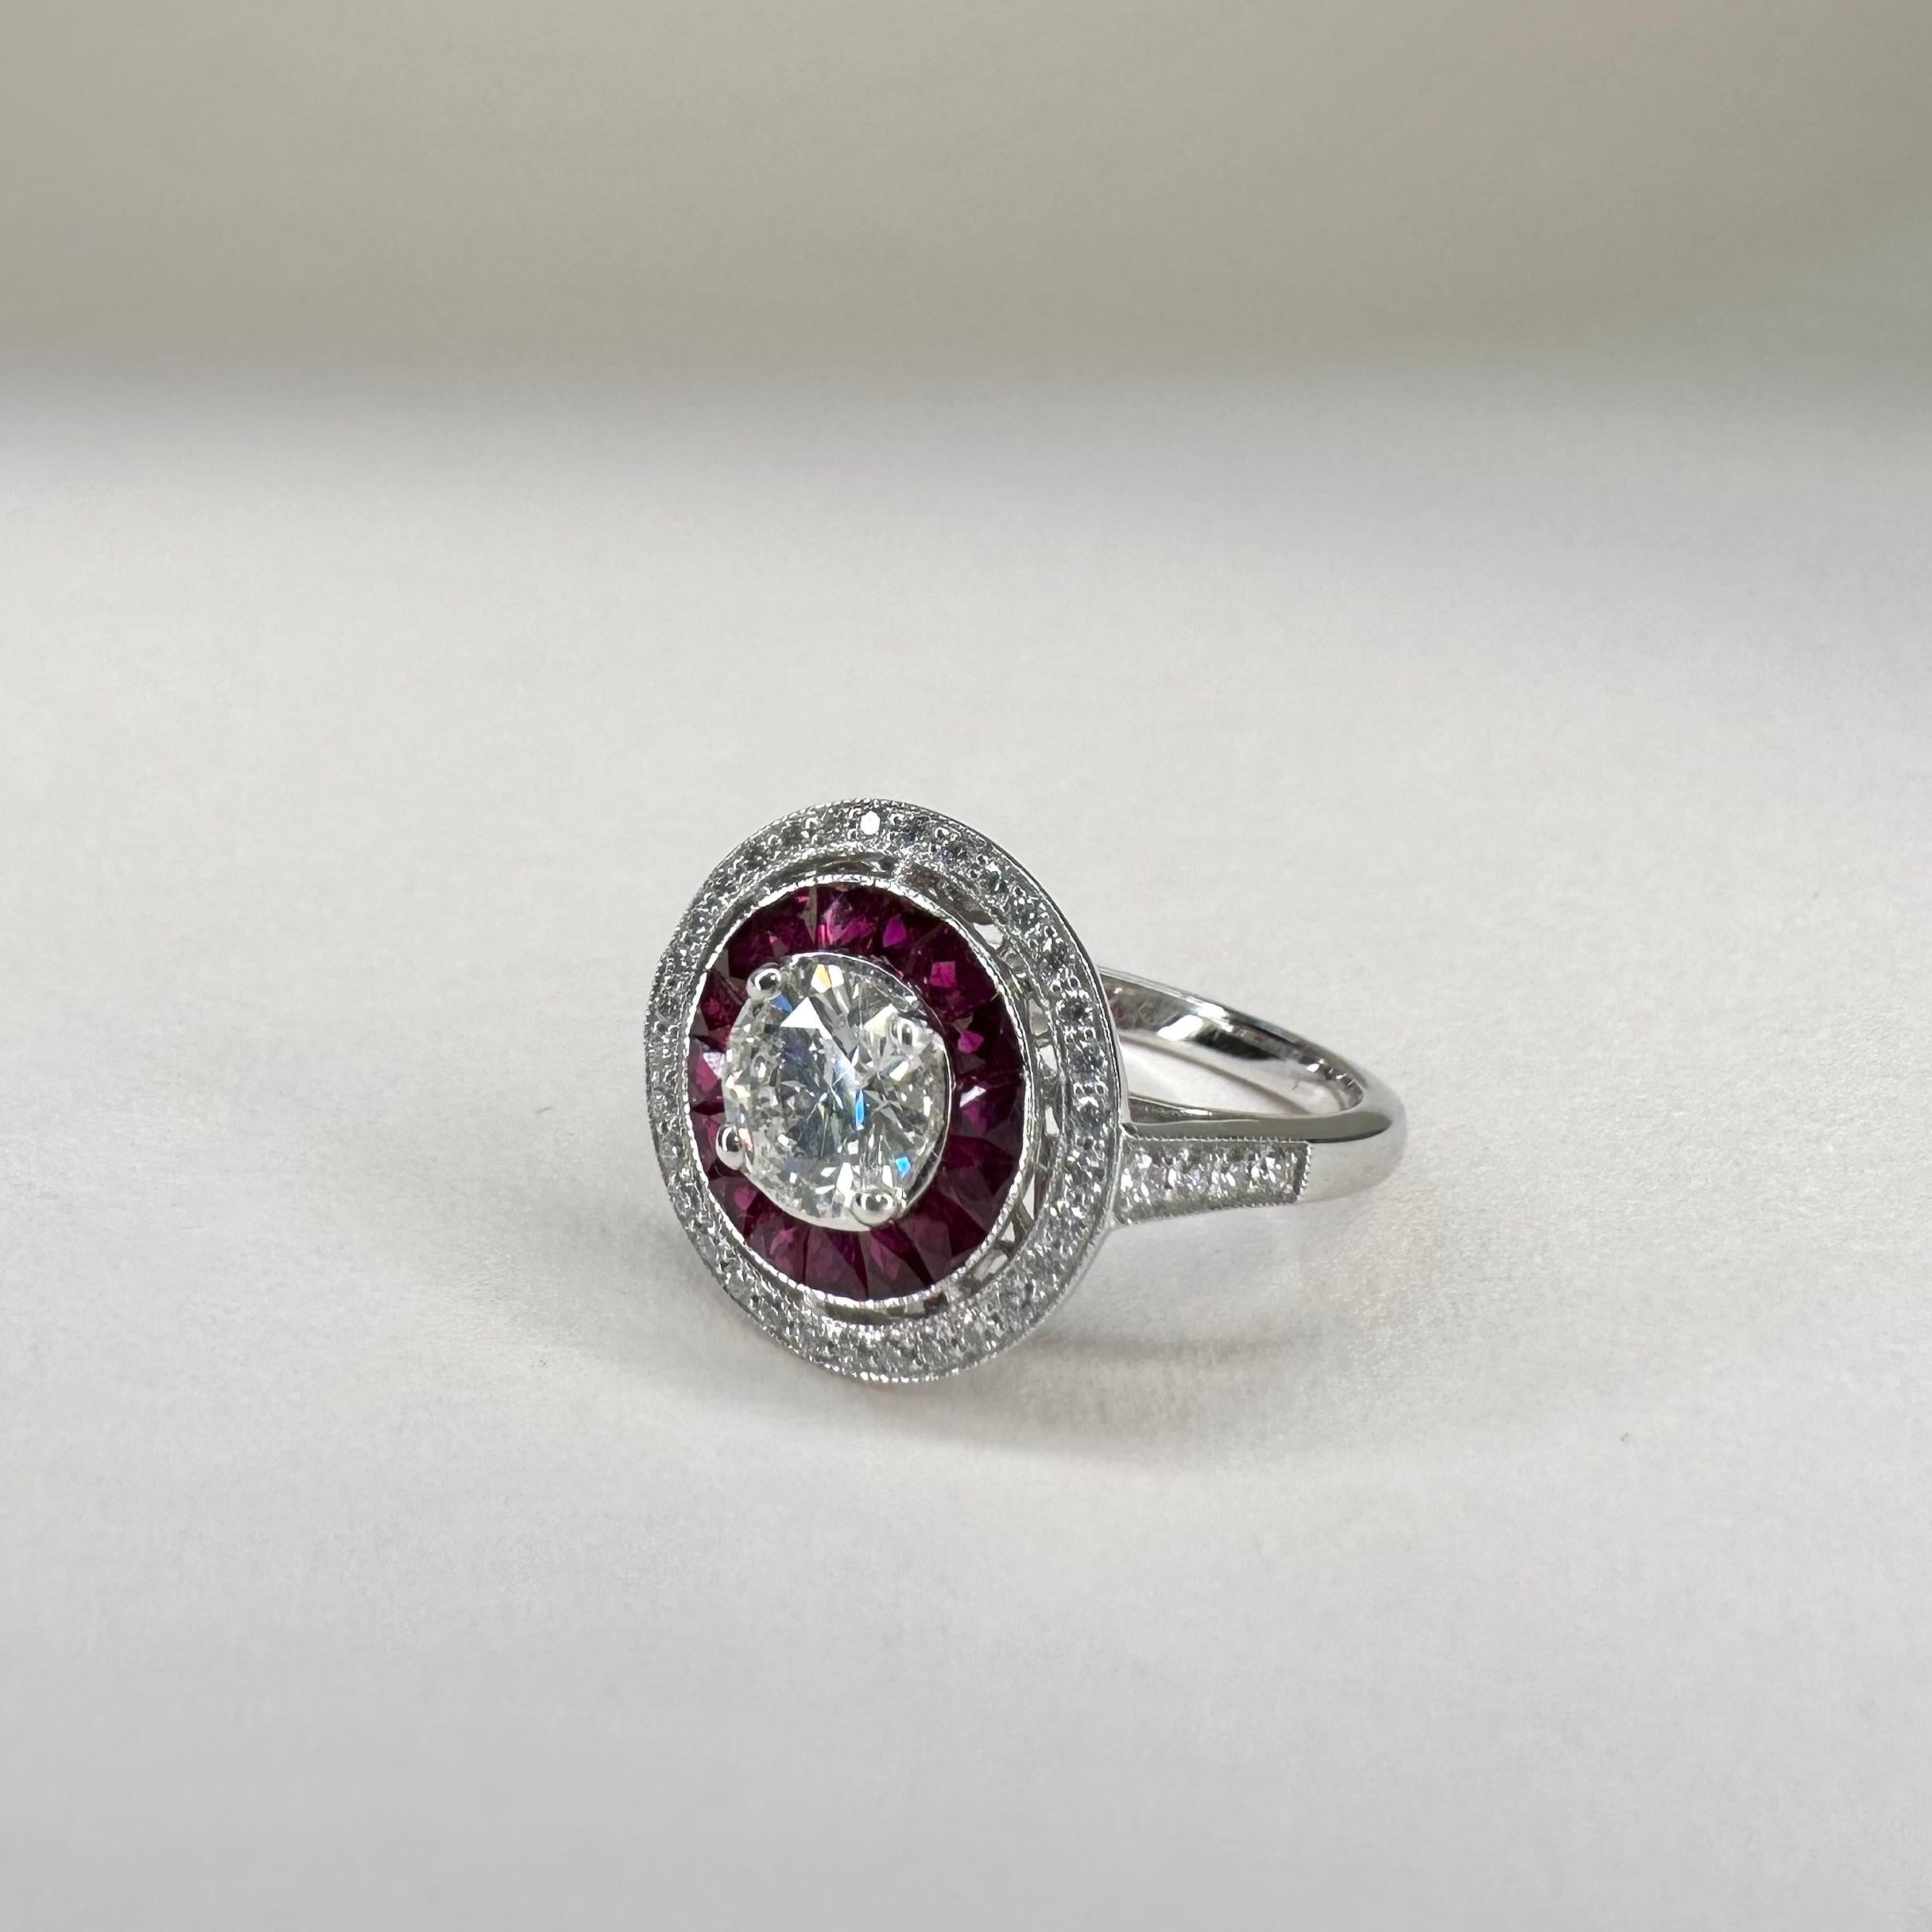 For Sale:  Art Deco Platinum 0.65 Cts Calibre Cut Ruby and 0.77 Ct Diamond GIA Certified 5